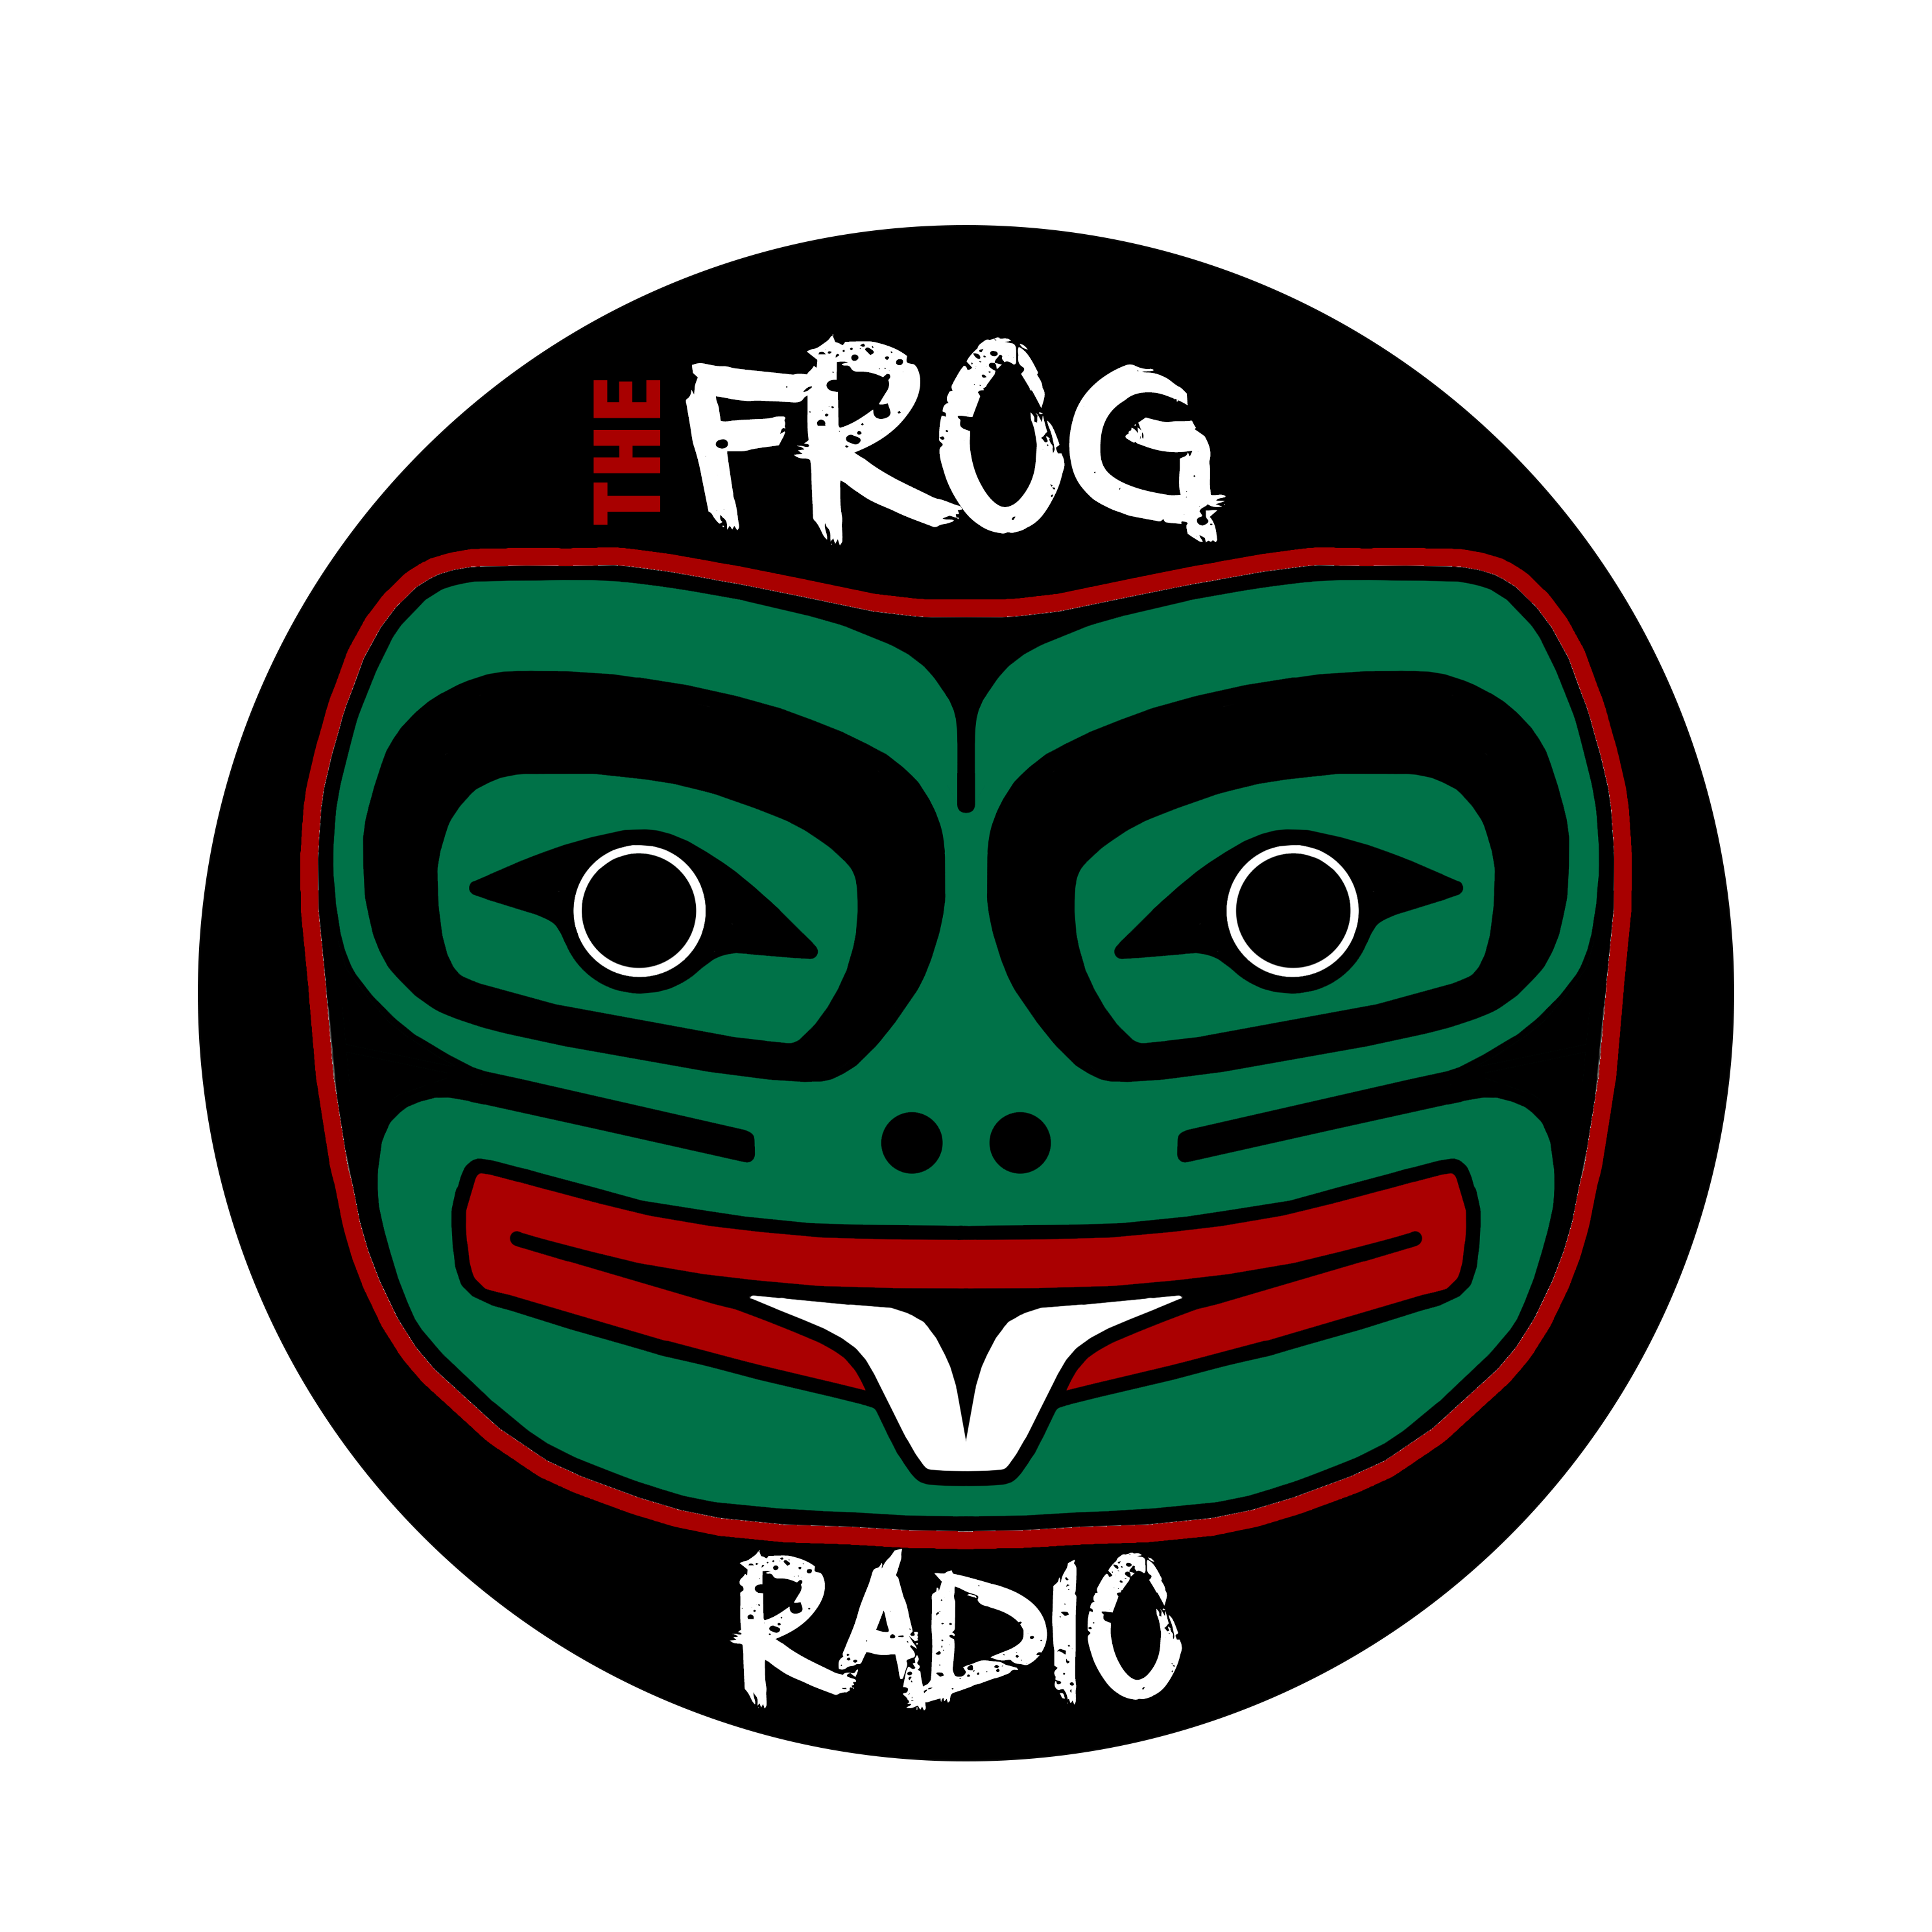 Art for All Day! Every by Day! The Frog Radio